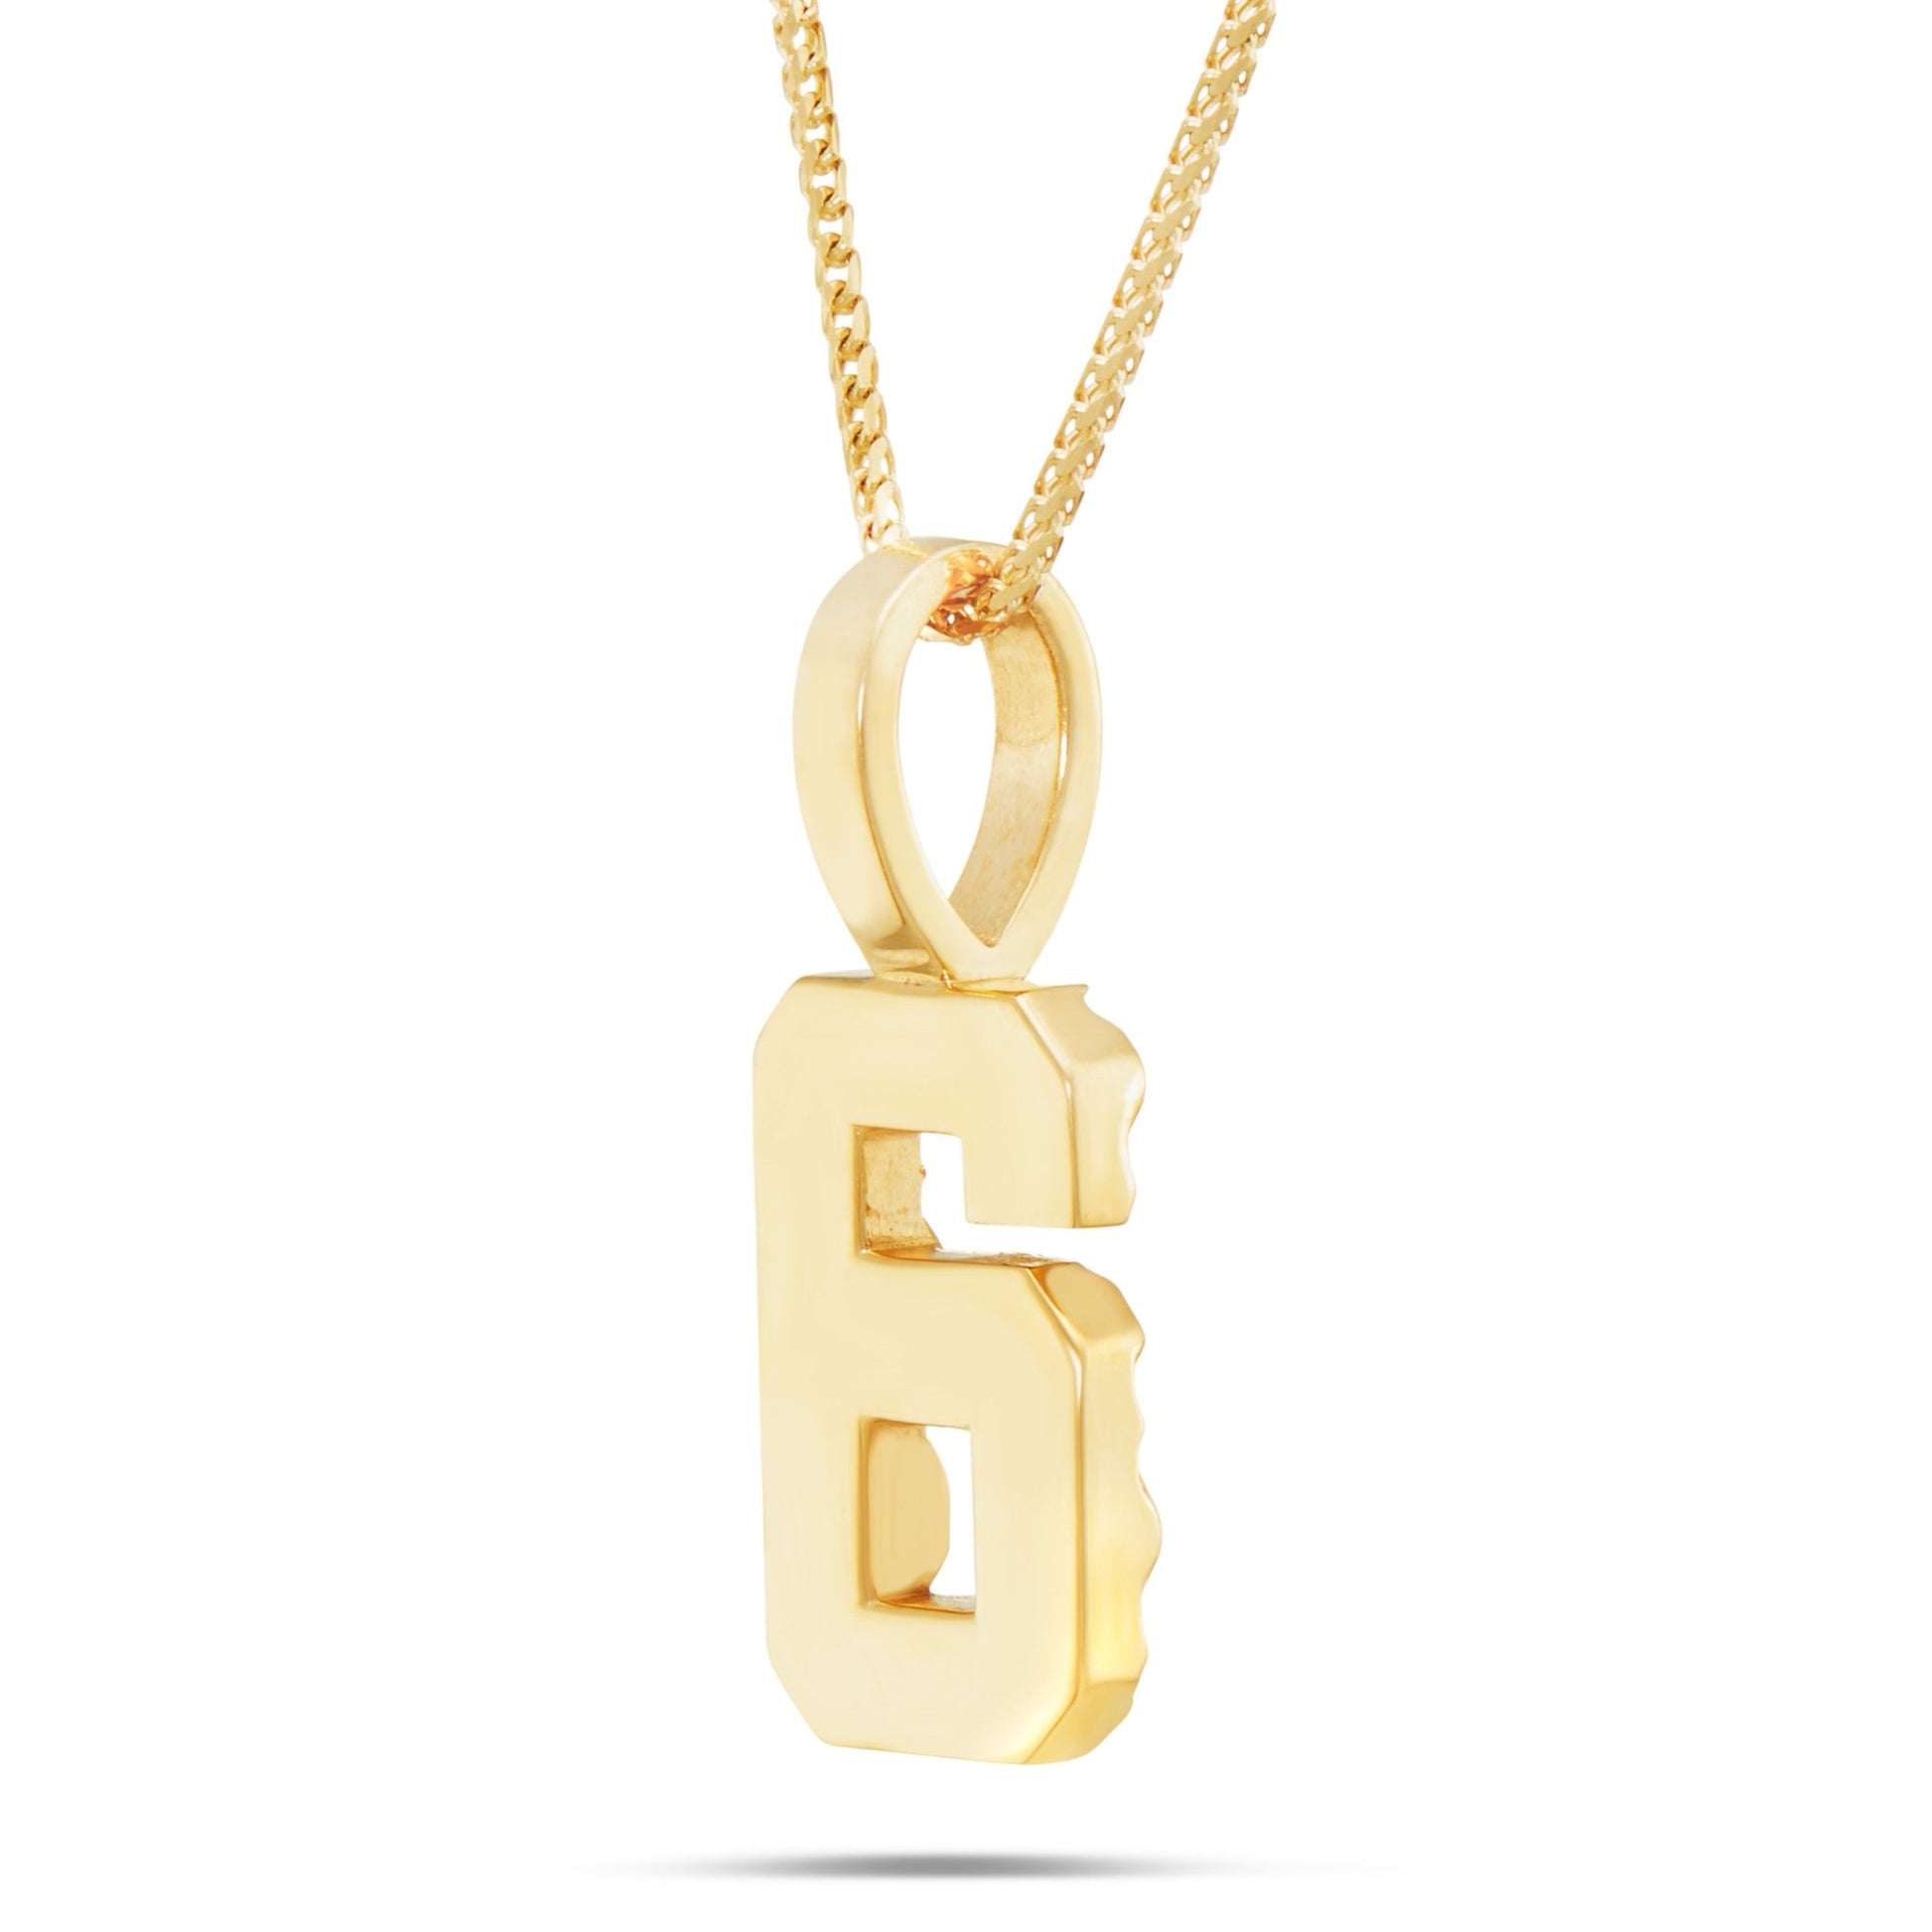 The Varsity Number Pendant Necklace